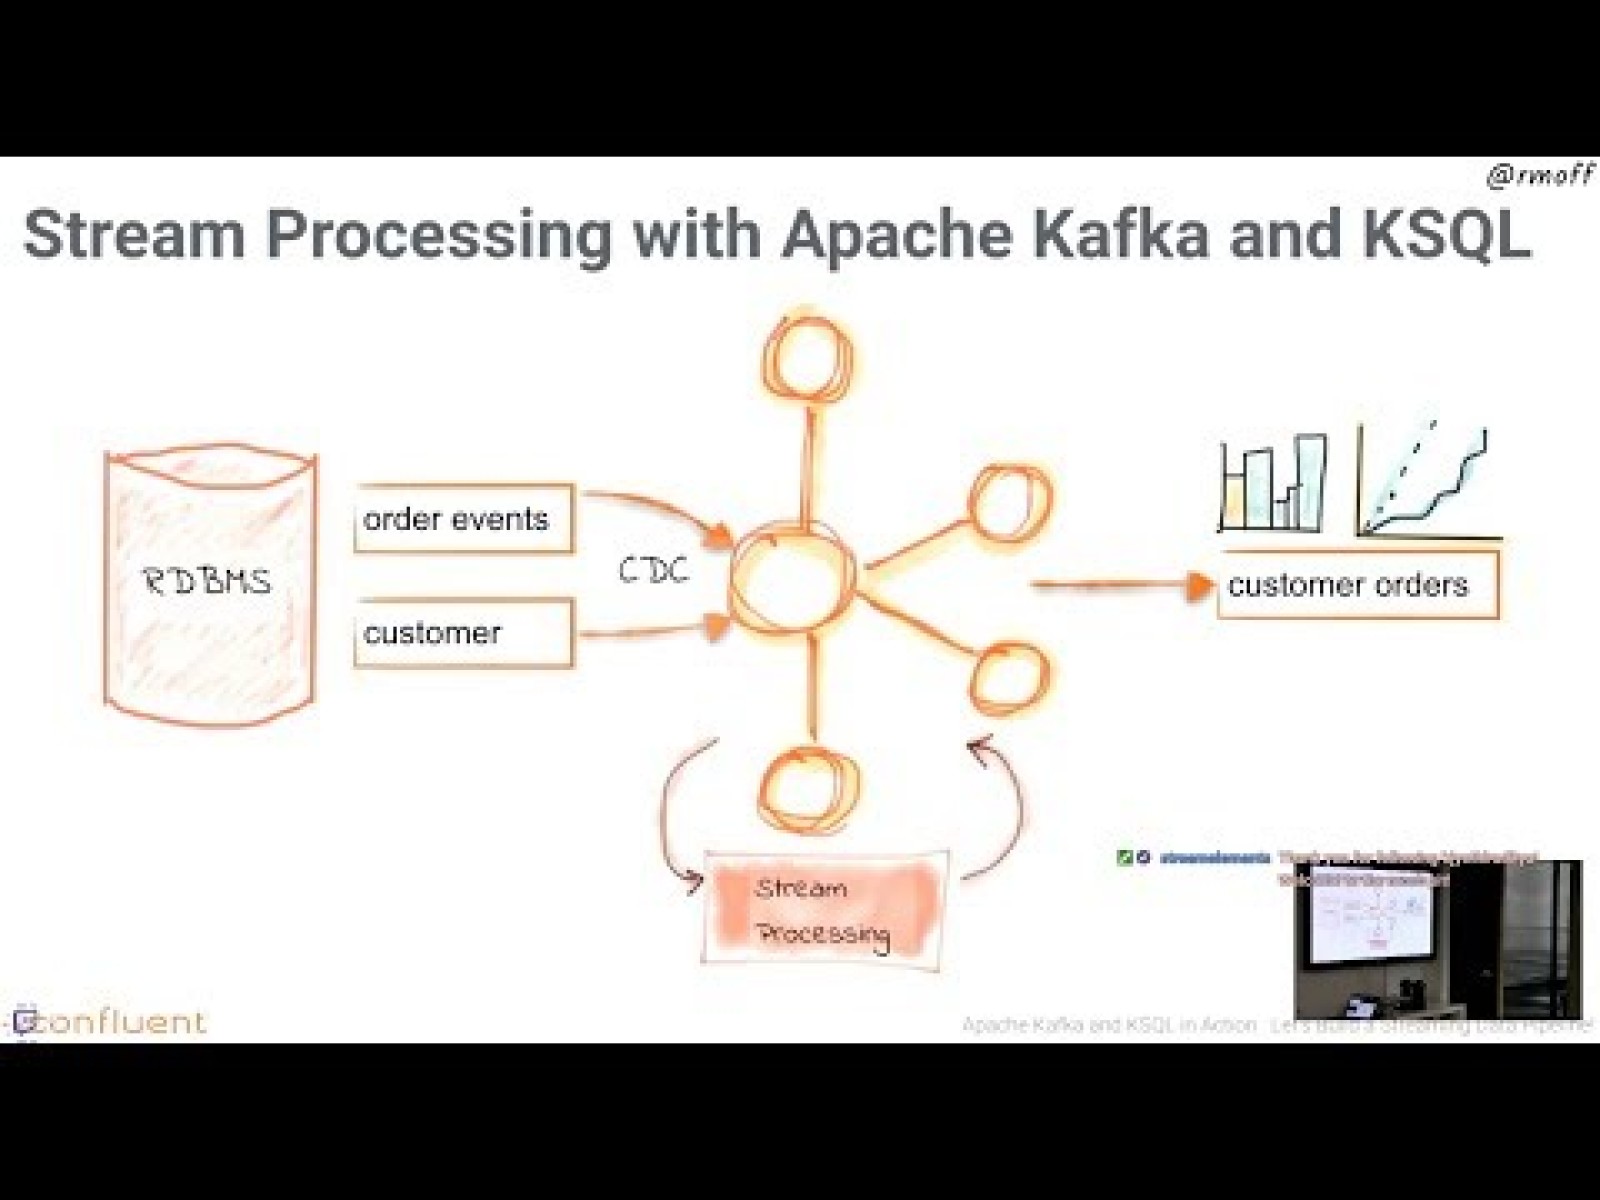 Apache Kafka and KSQL in Action : Let’s Build a Streaming Data Pipeline!